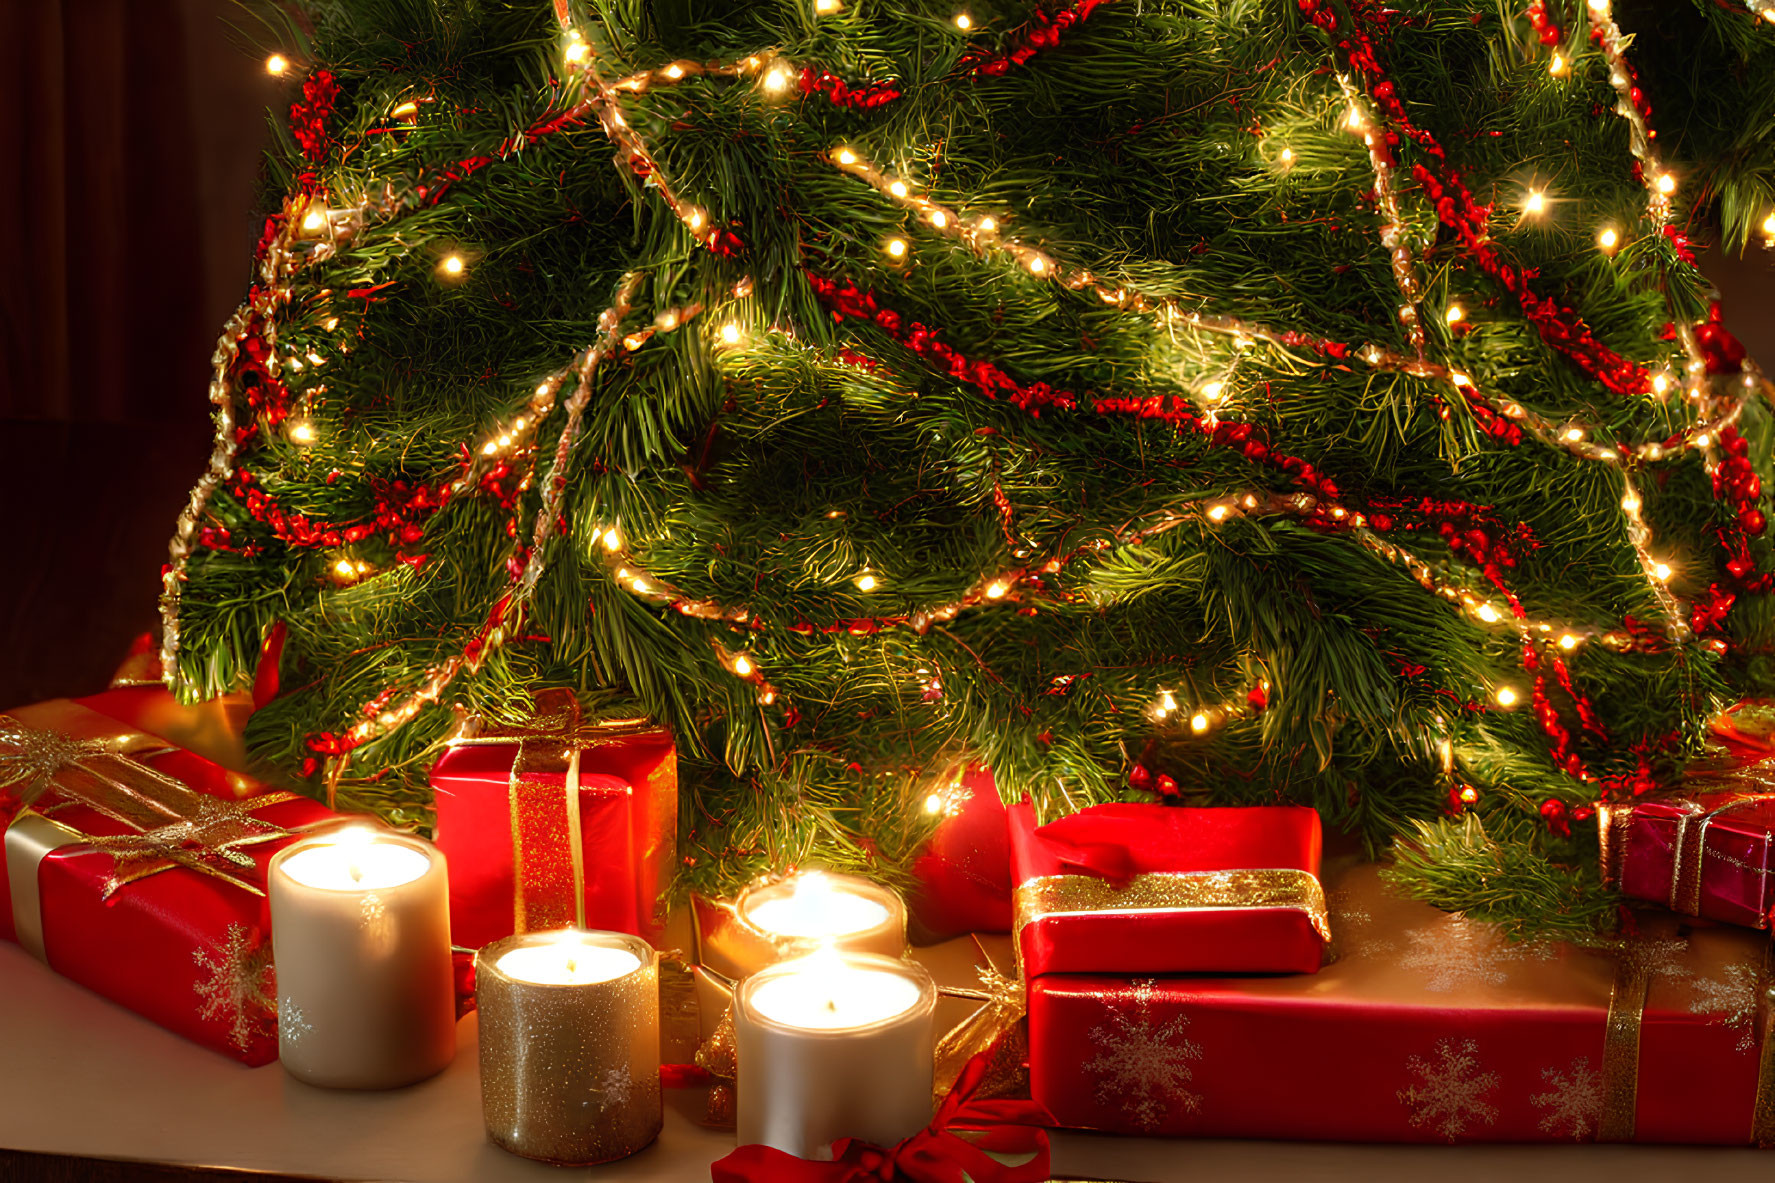 Festive Christmas scene with tree, lights, gifts, and candles